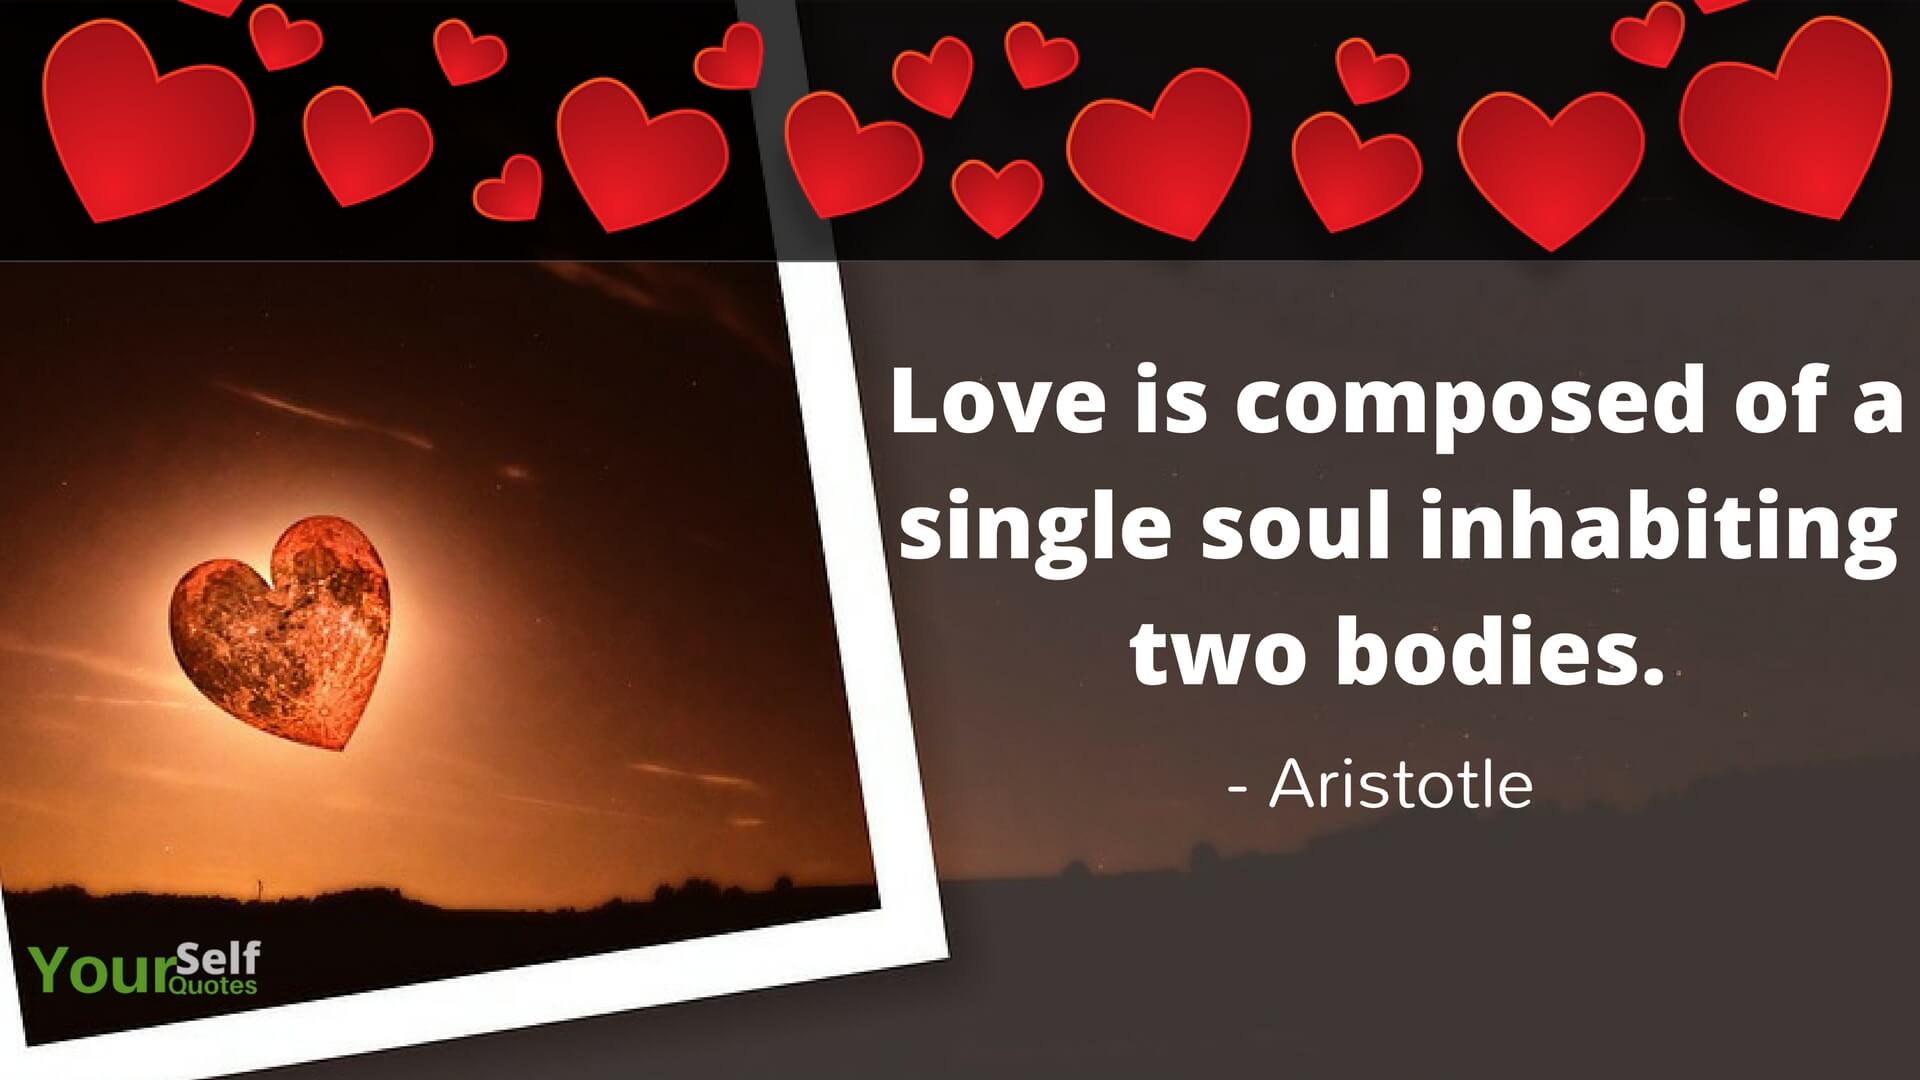 Valentine Day Quotes By Aristotle - Heart - HD Wallpaper 